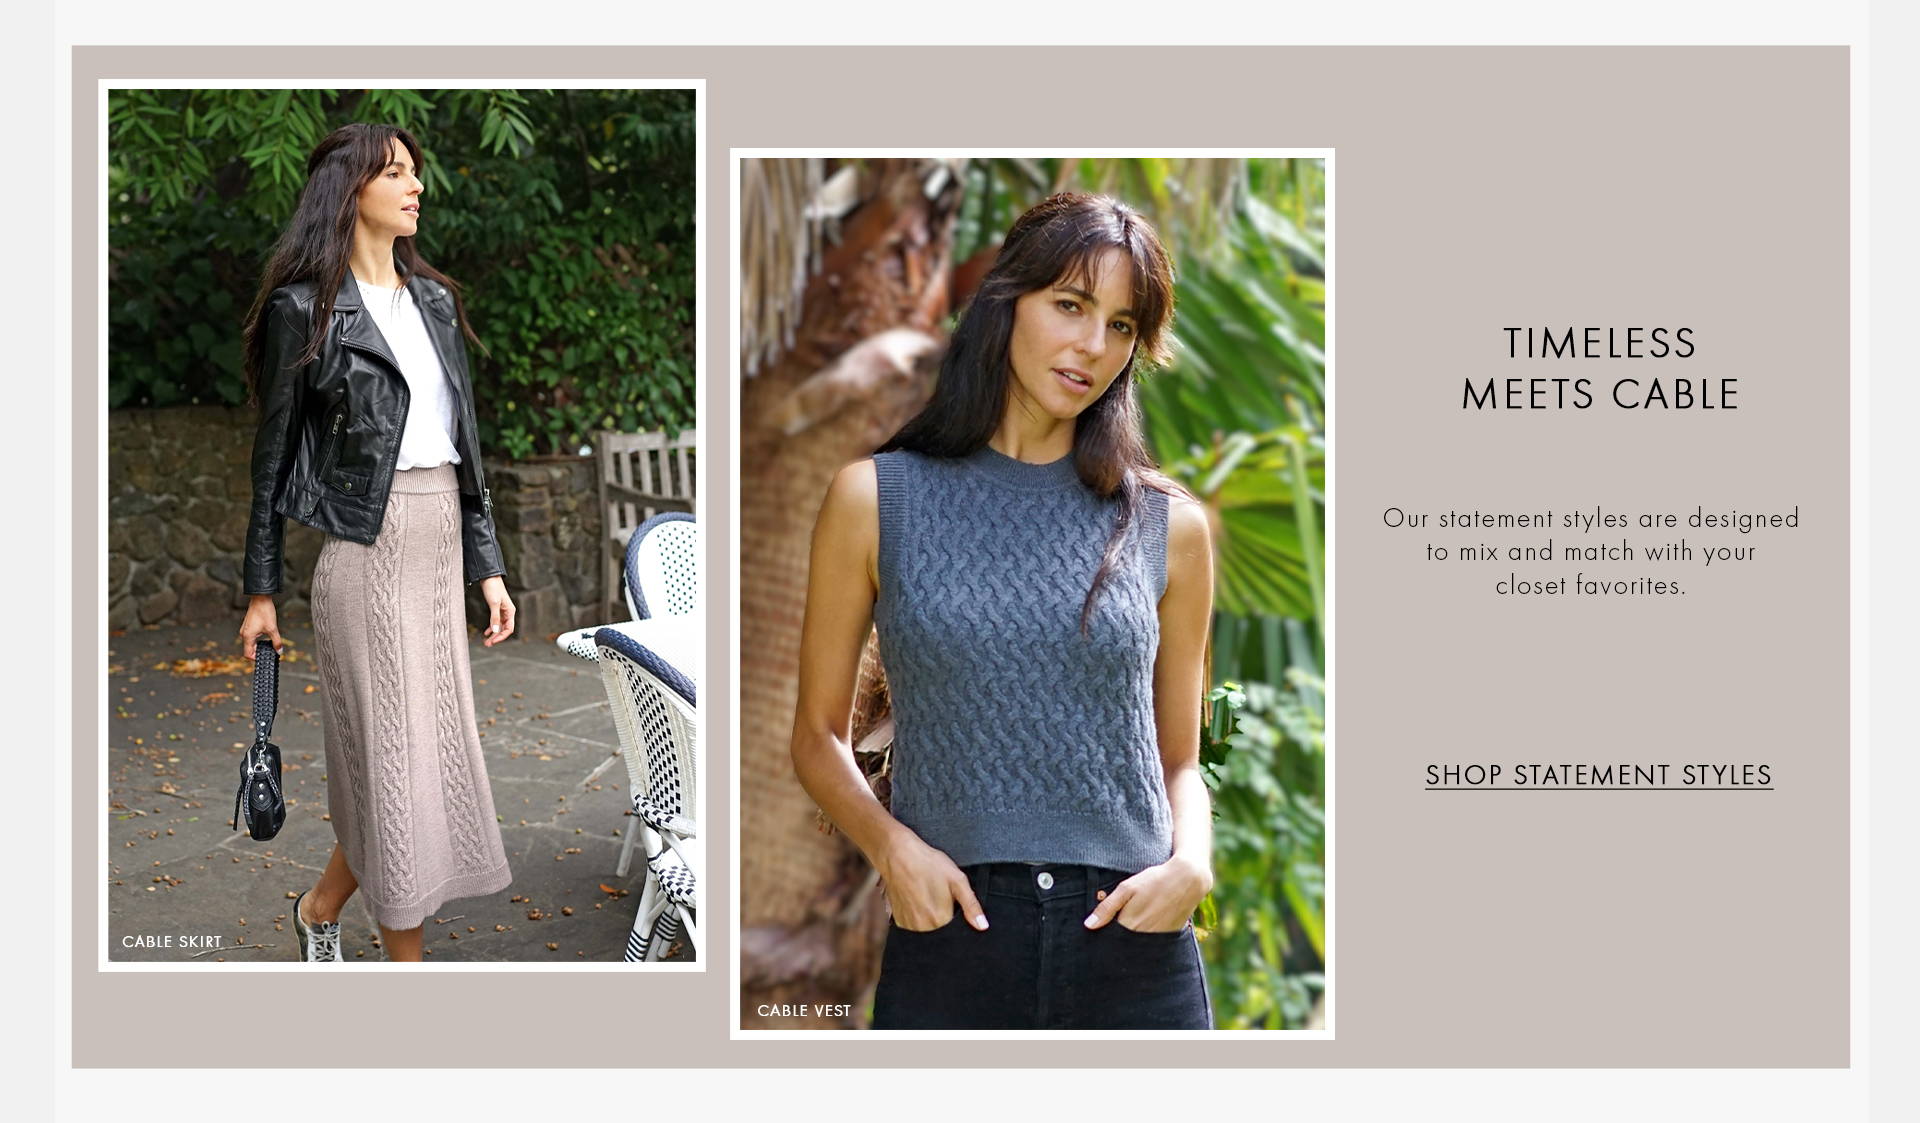 Timeless meets cable. Our statement styles are designed to mix and match with your closet favorites. Shop Statement styles texts on the image with one photo of a female model wearing a white top, a black leather jacket and a grey cable skirt and holding a black small bag and the other photo of a model wearing a darker grey cable vest.